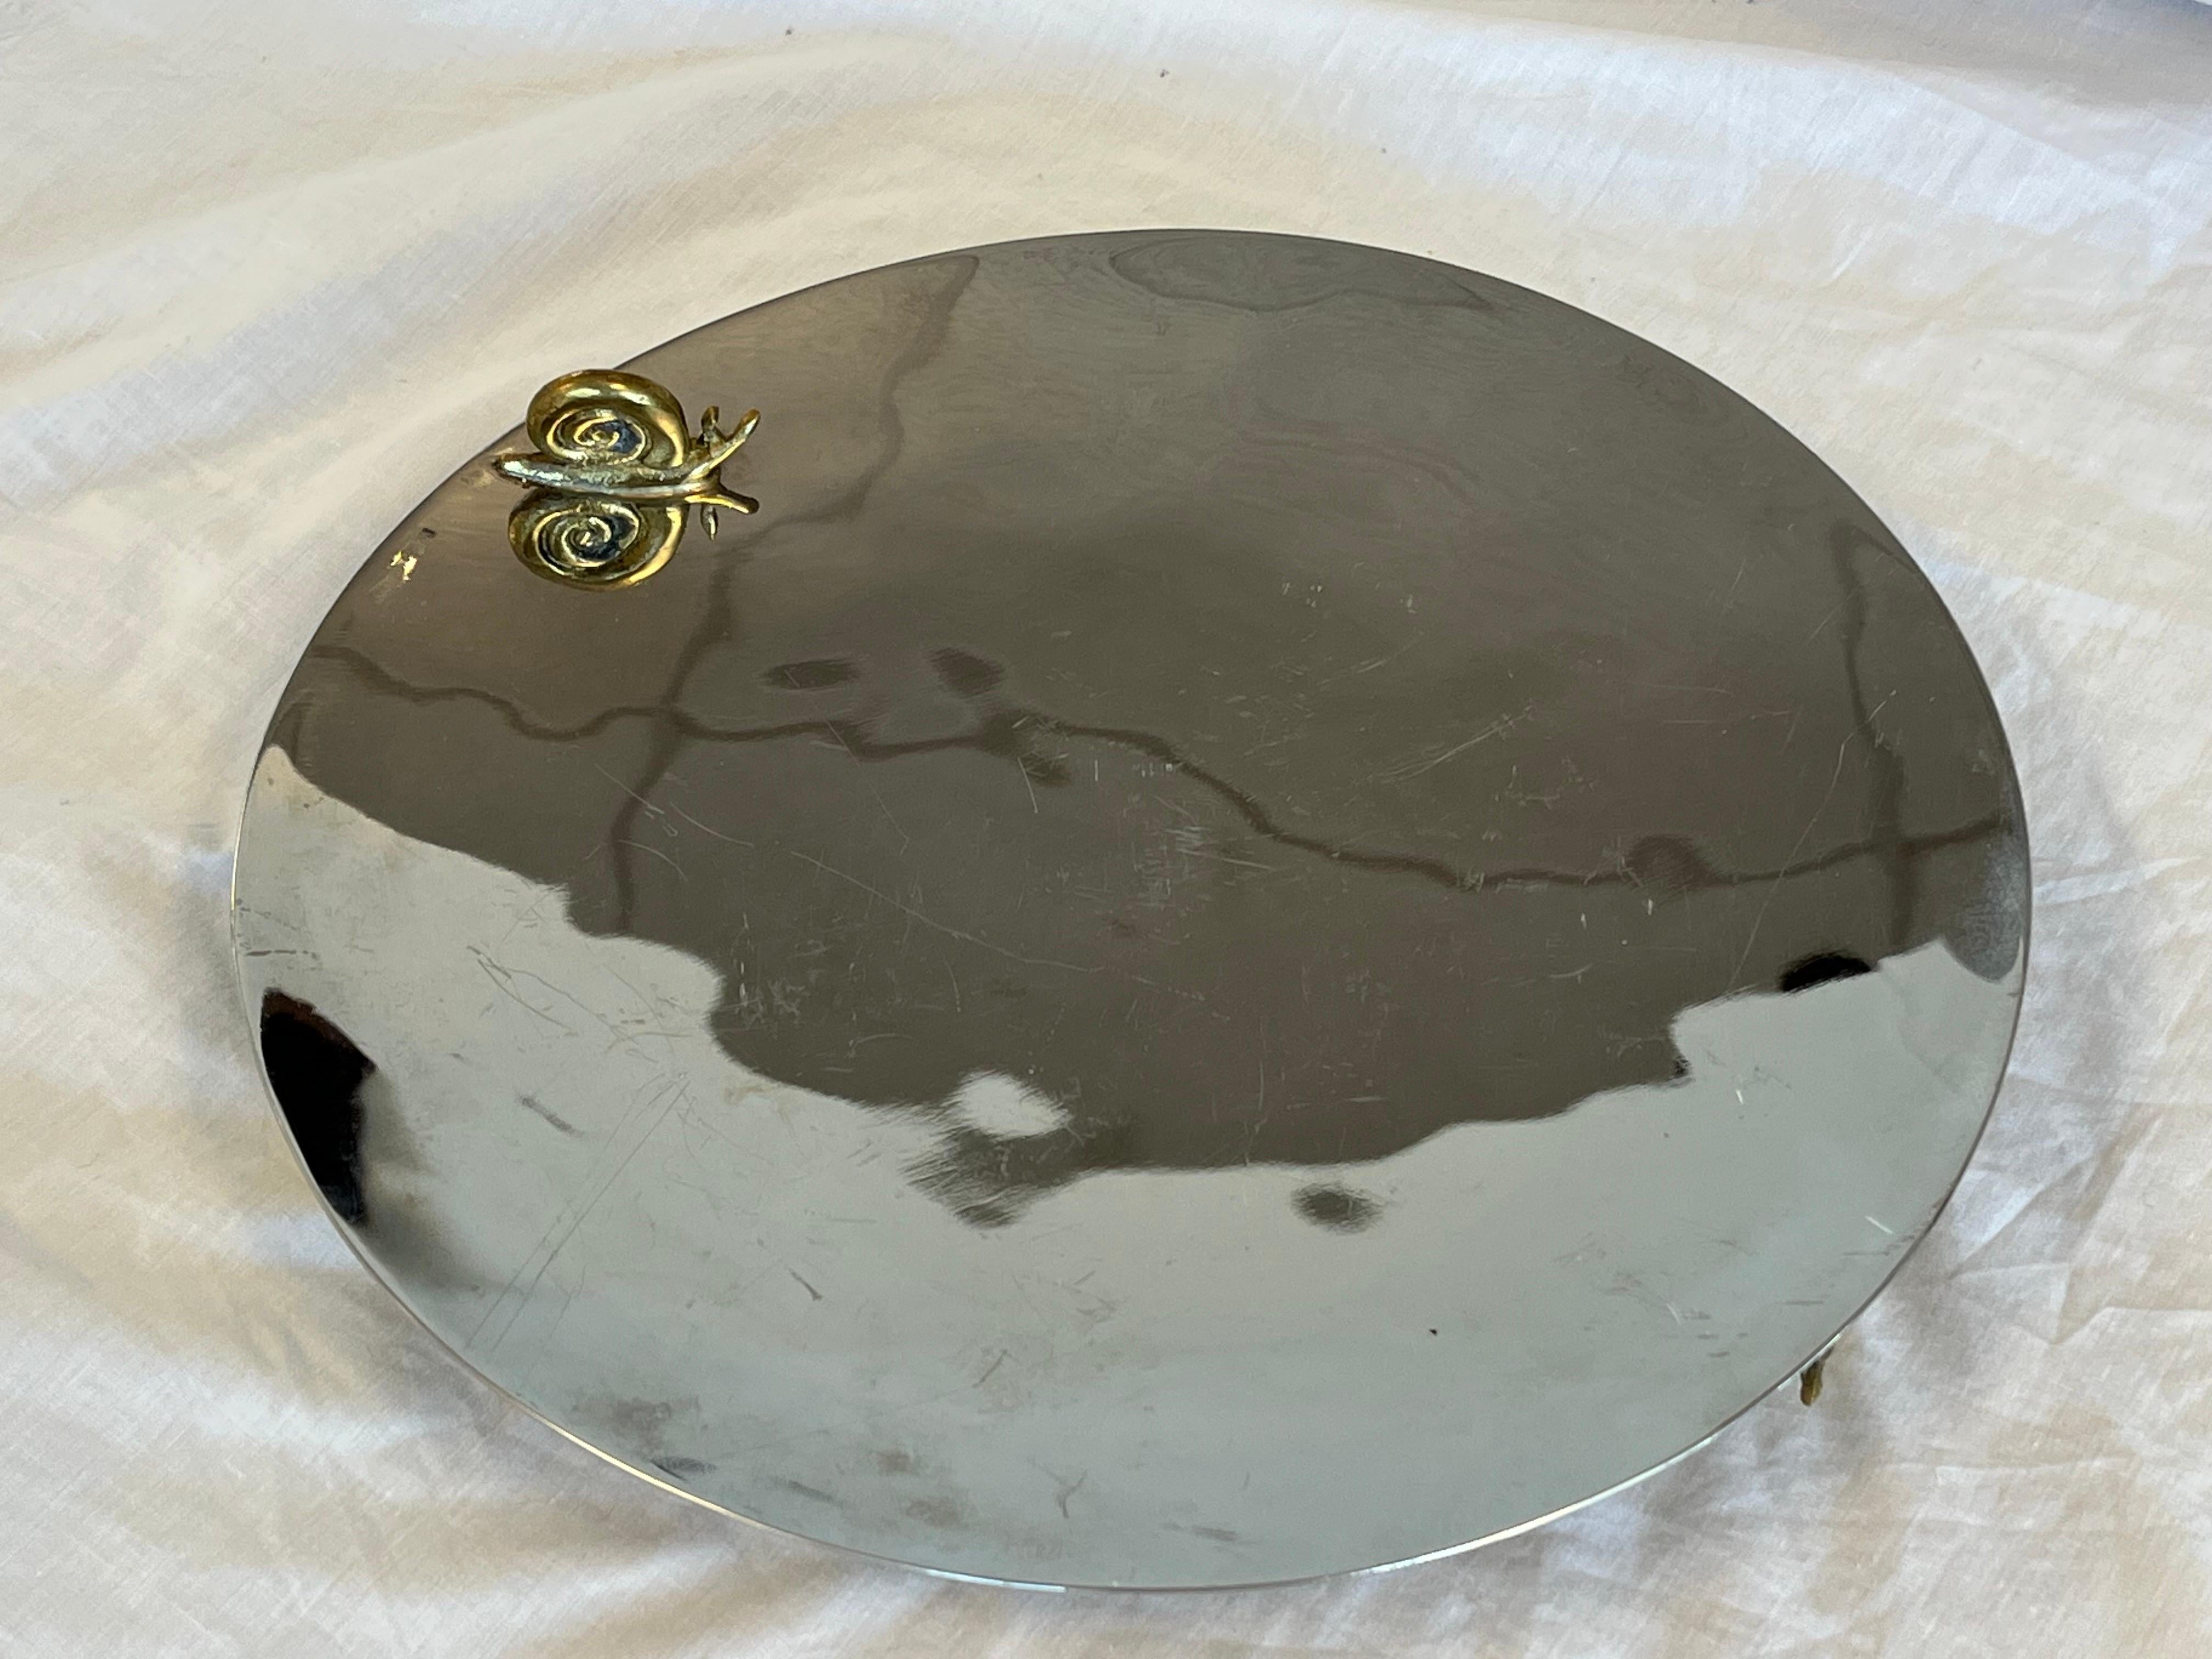 A contemporary serving tray or platter with four whimsical snail decorations, three functioning as the feet while a fourth sits atop the gorgeous tray, by skilled designer Michael Aram. Who is Michael Aram, 